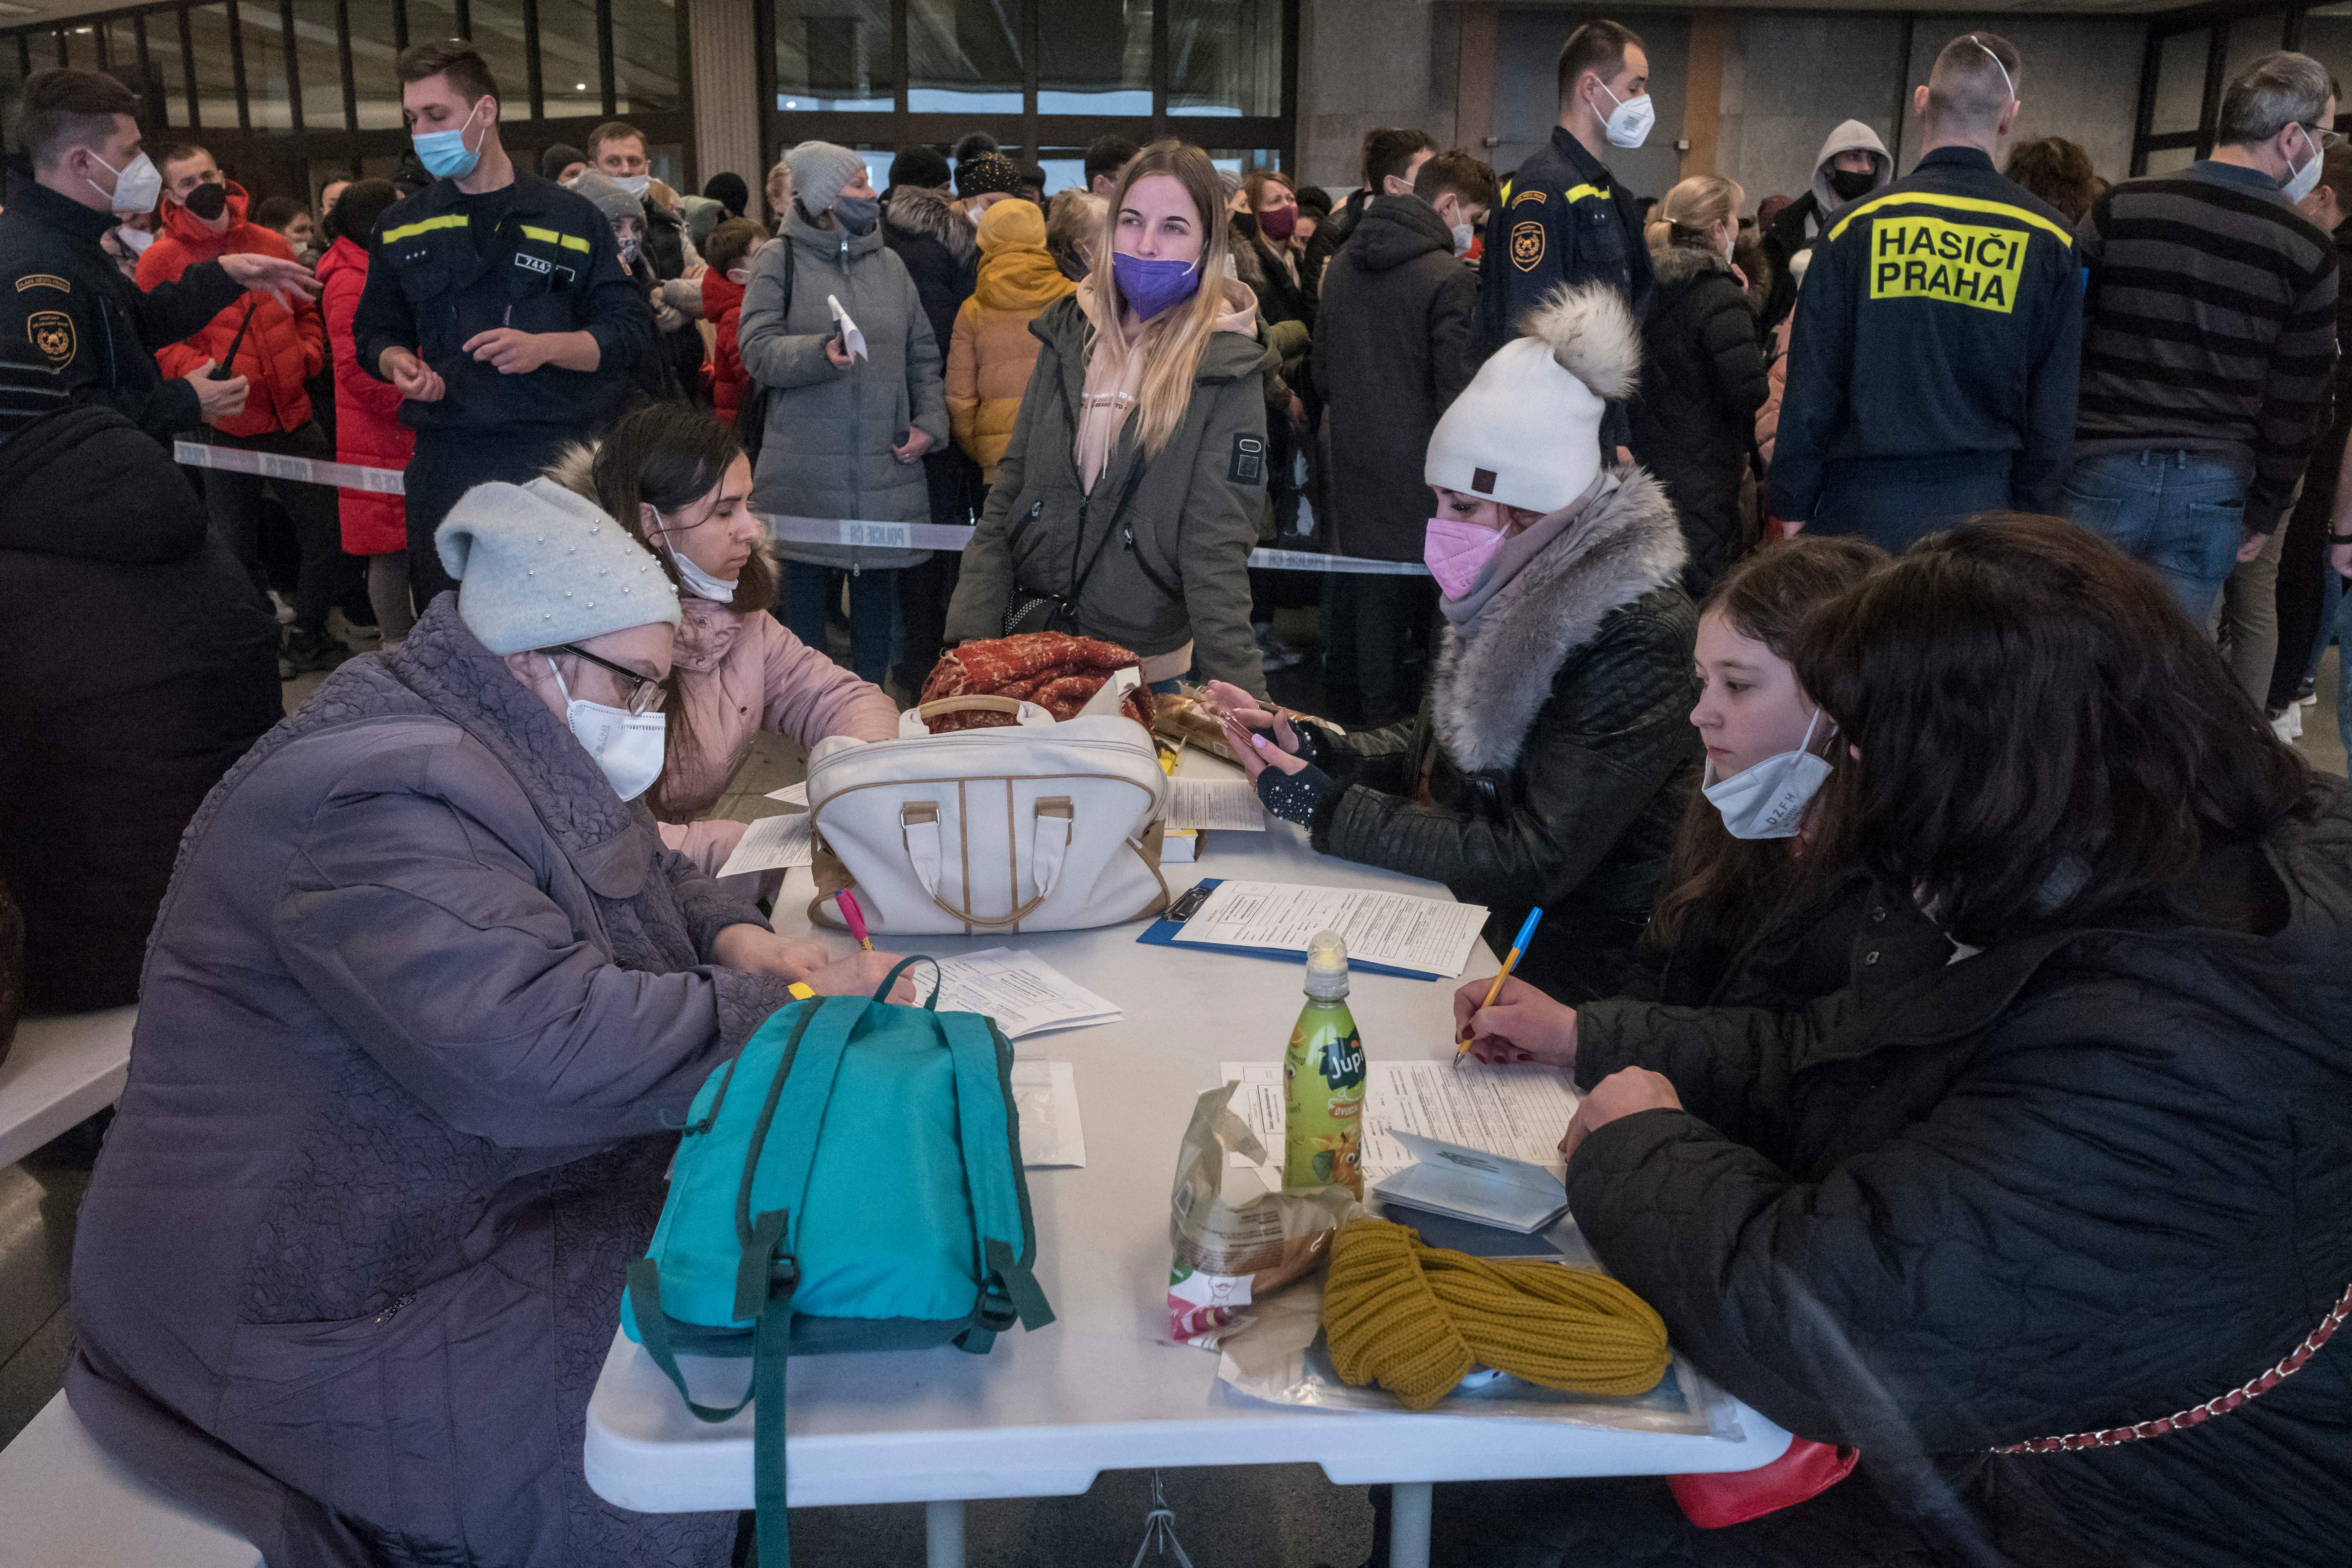 Refugees from Ukraine queue to file for residency permits at the regional assistance centre for refugees in Prague's Congress Centre in Prague, Czech Republic, on March 7.